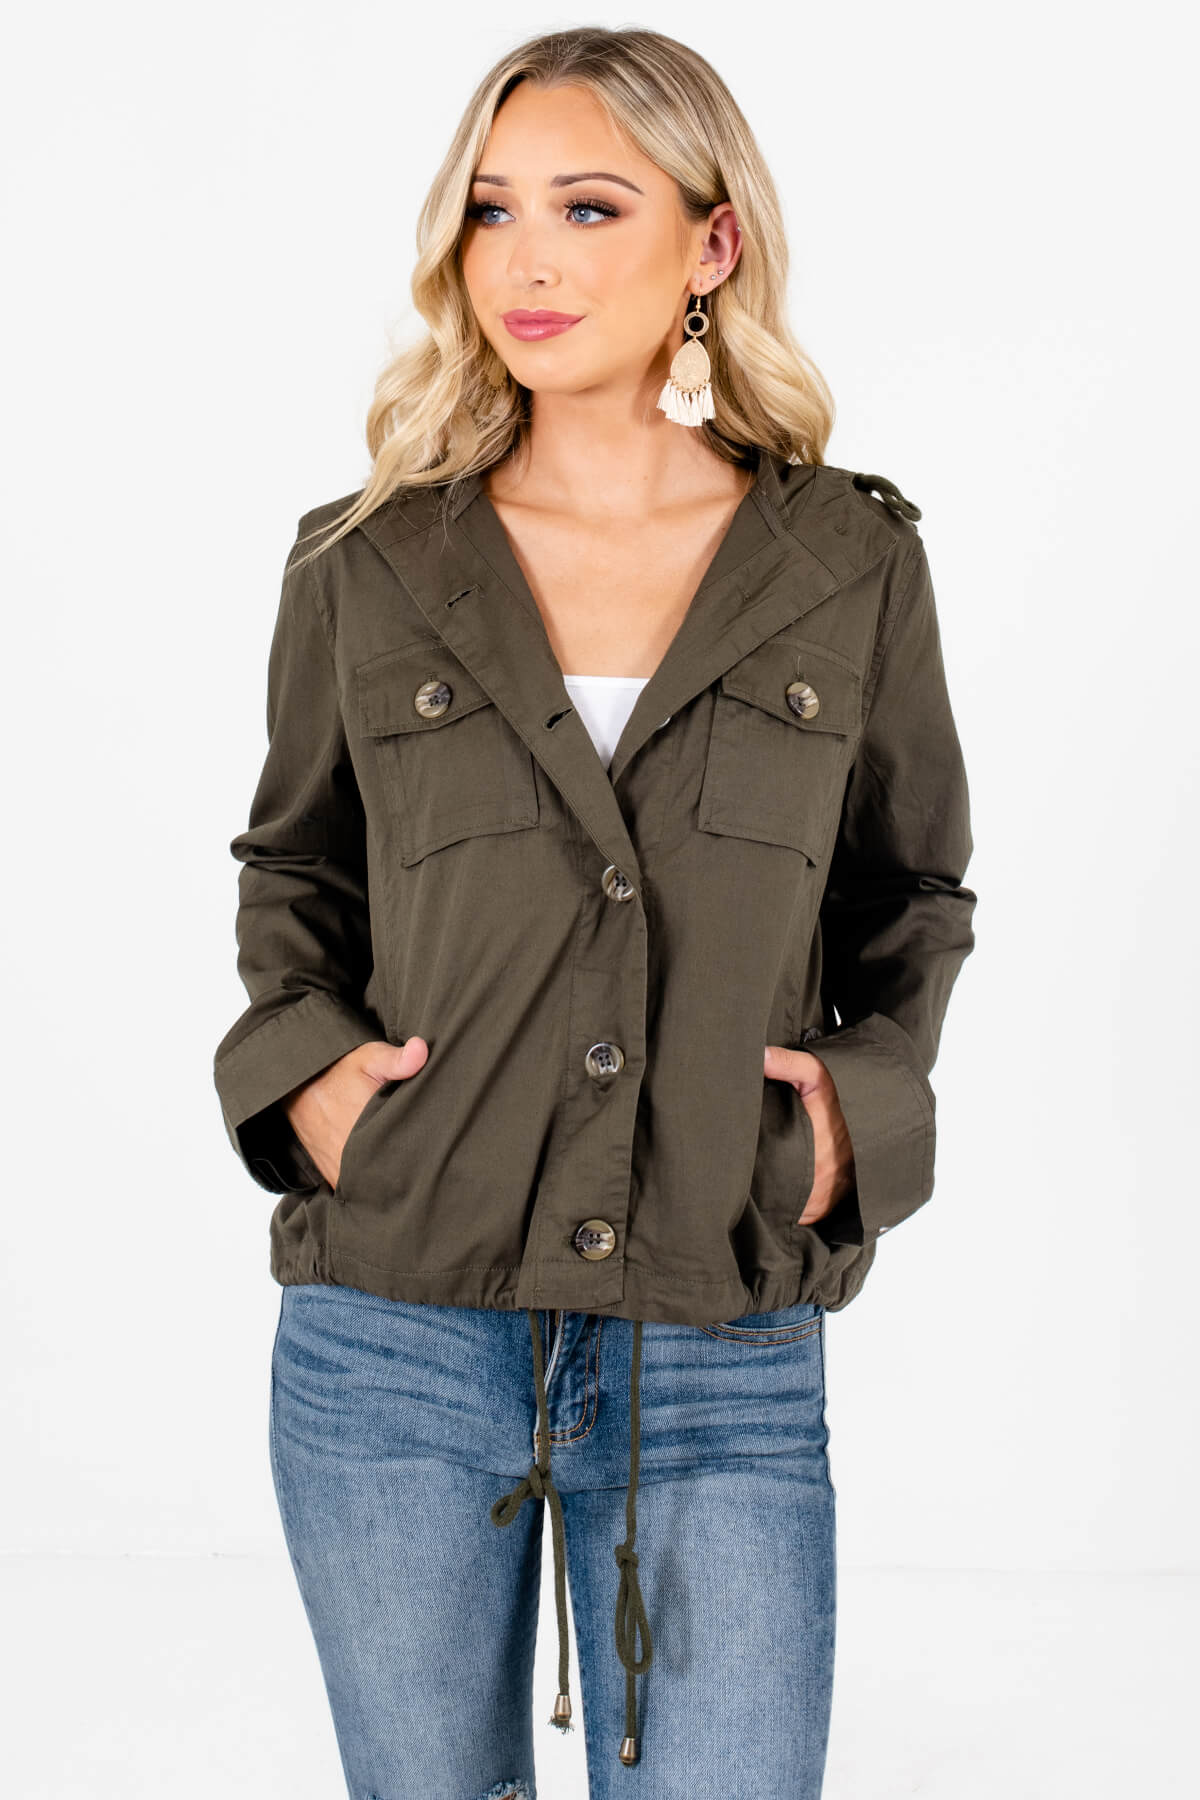 Women's Olive Green Lightweight High-Quality Material Boutique Jacket